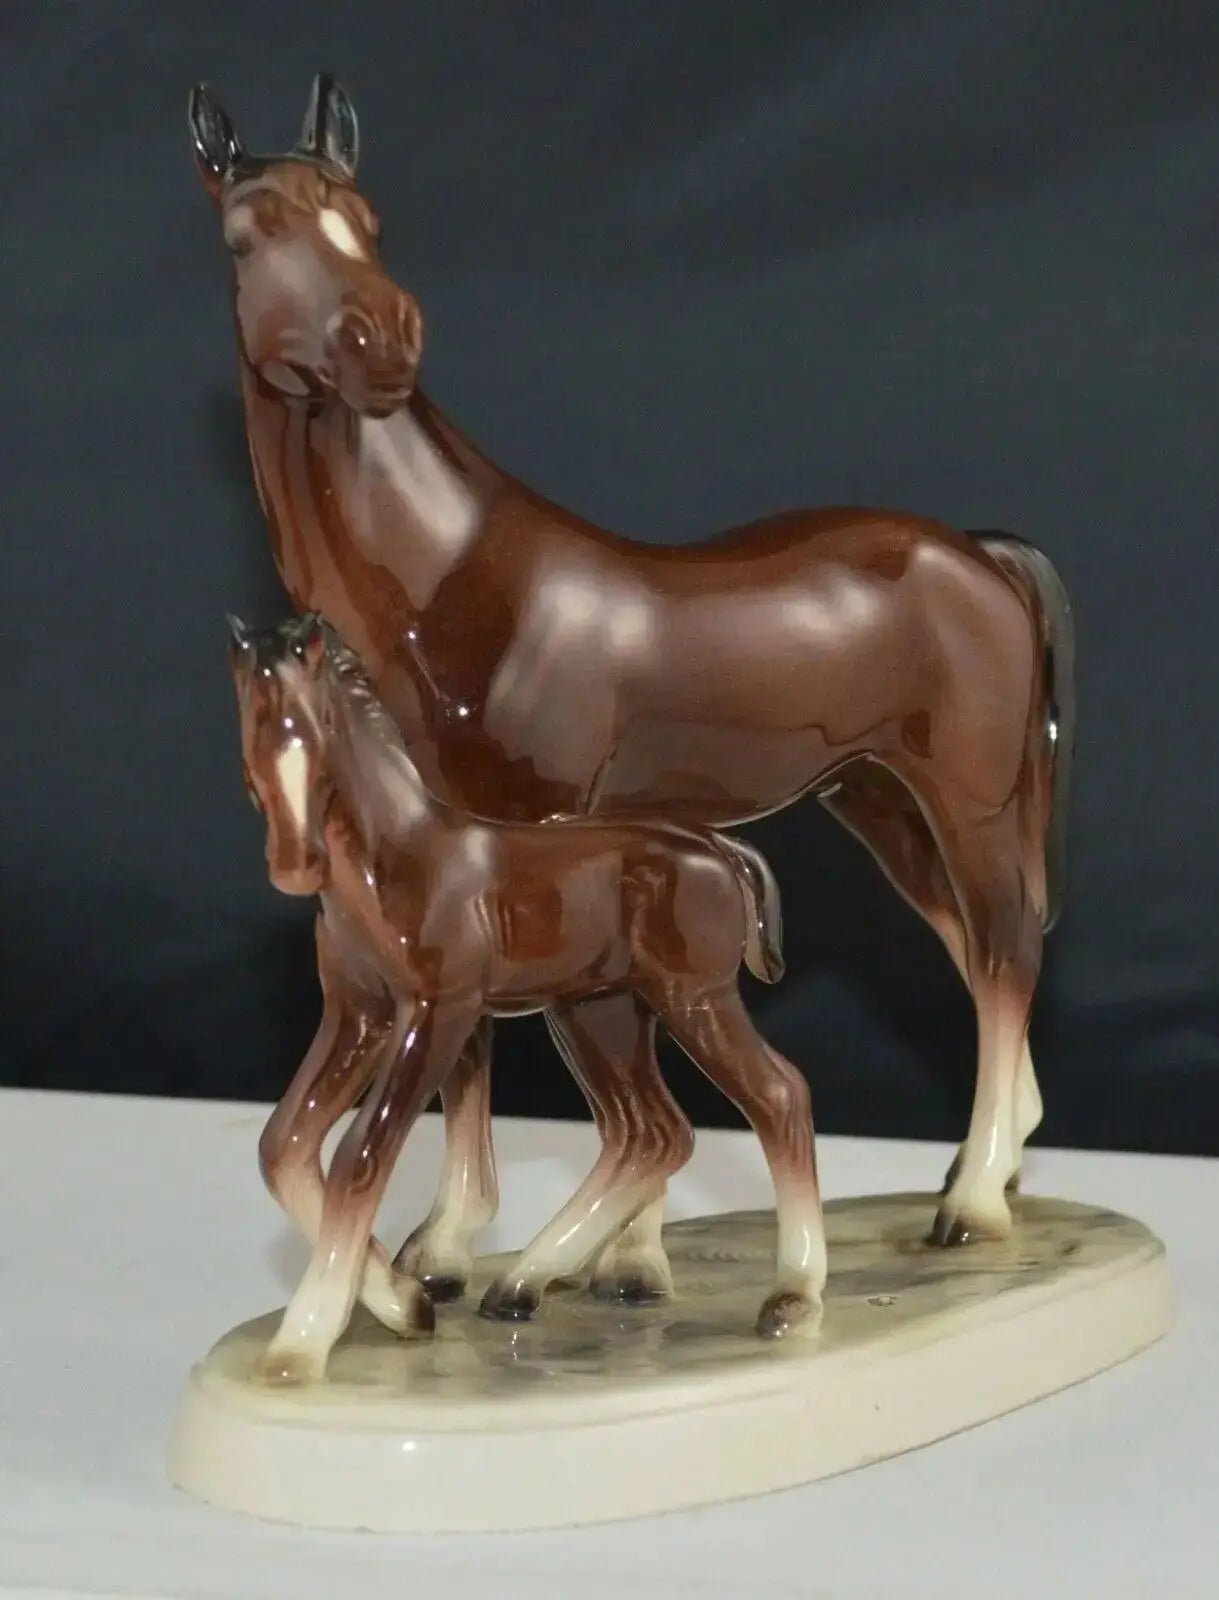 VINTAGE HERTWIG HORSE AND FOAL FIGURINE - TMD167207